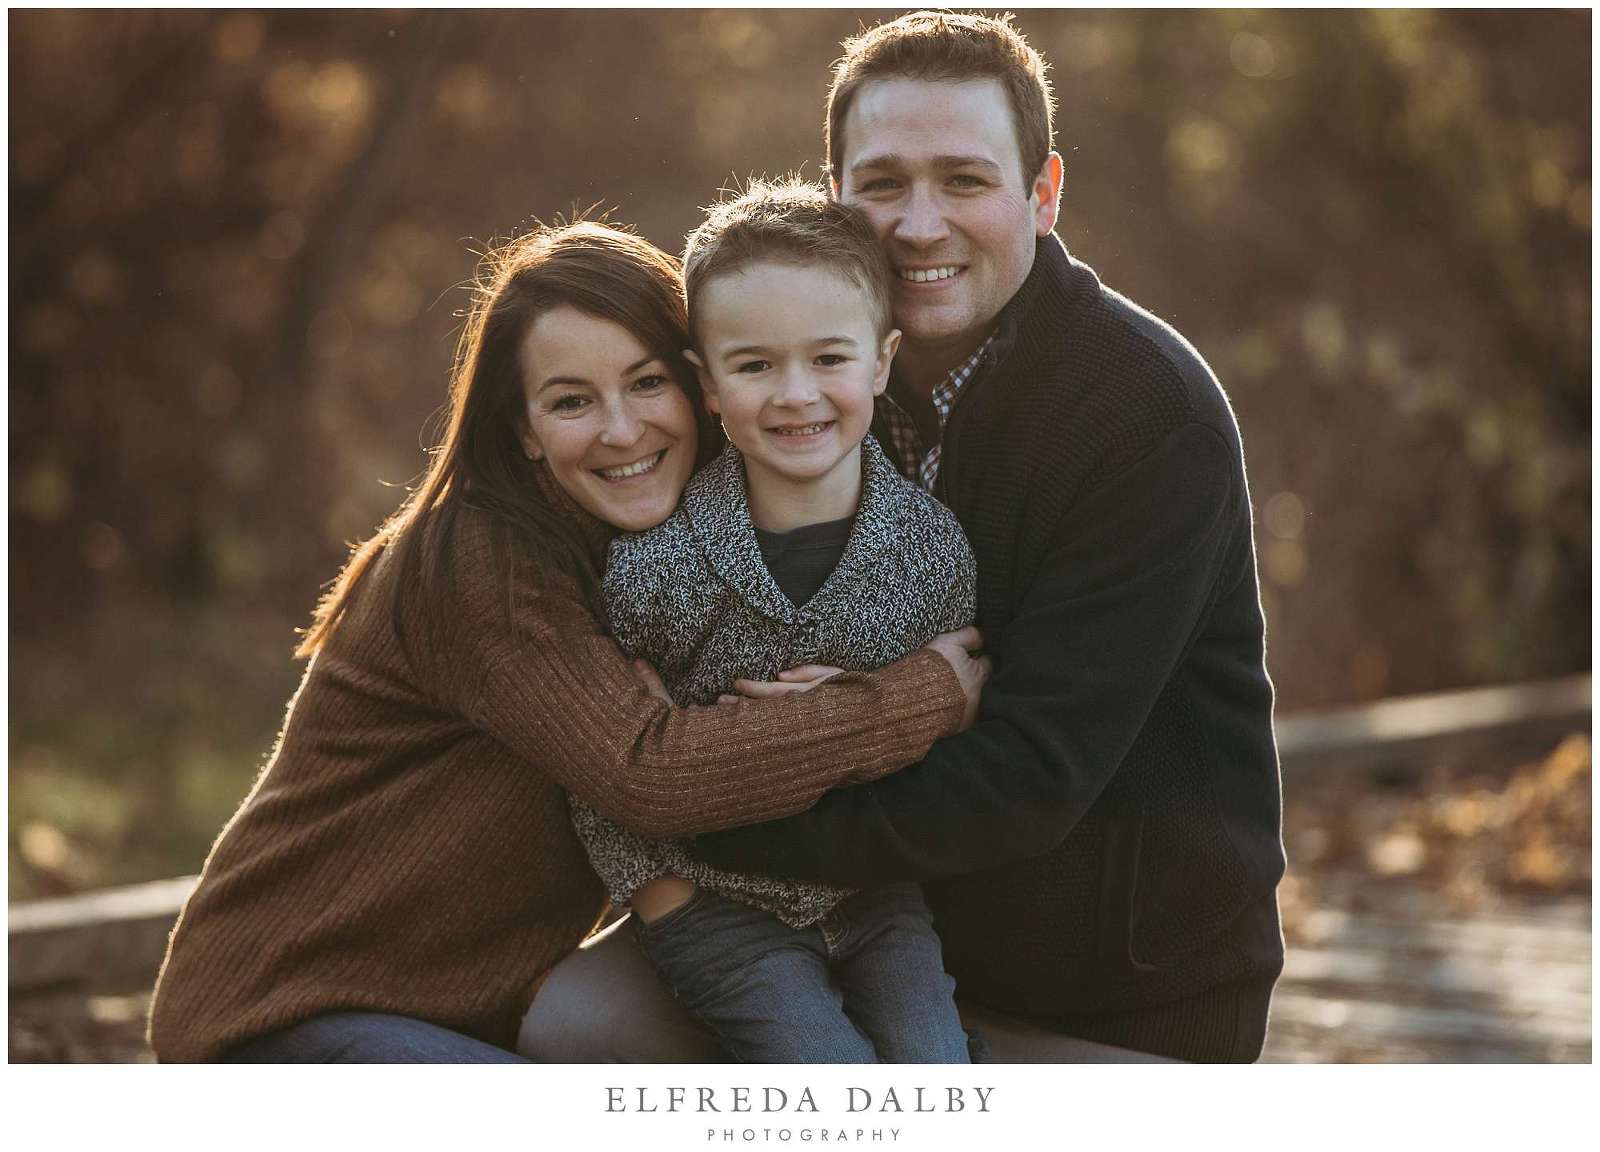 The Ultimate Family Portrait Poses Guide | Click Love Grow